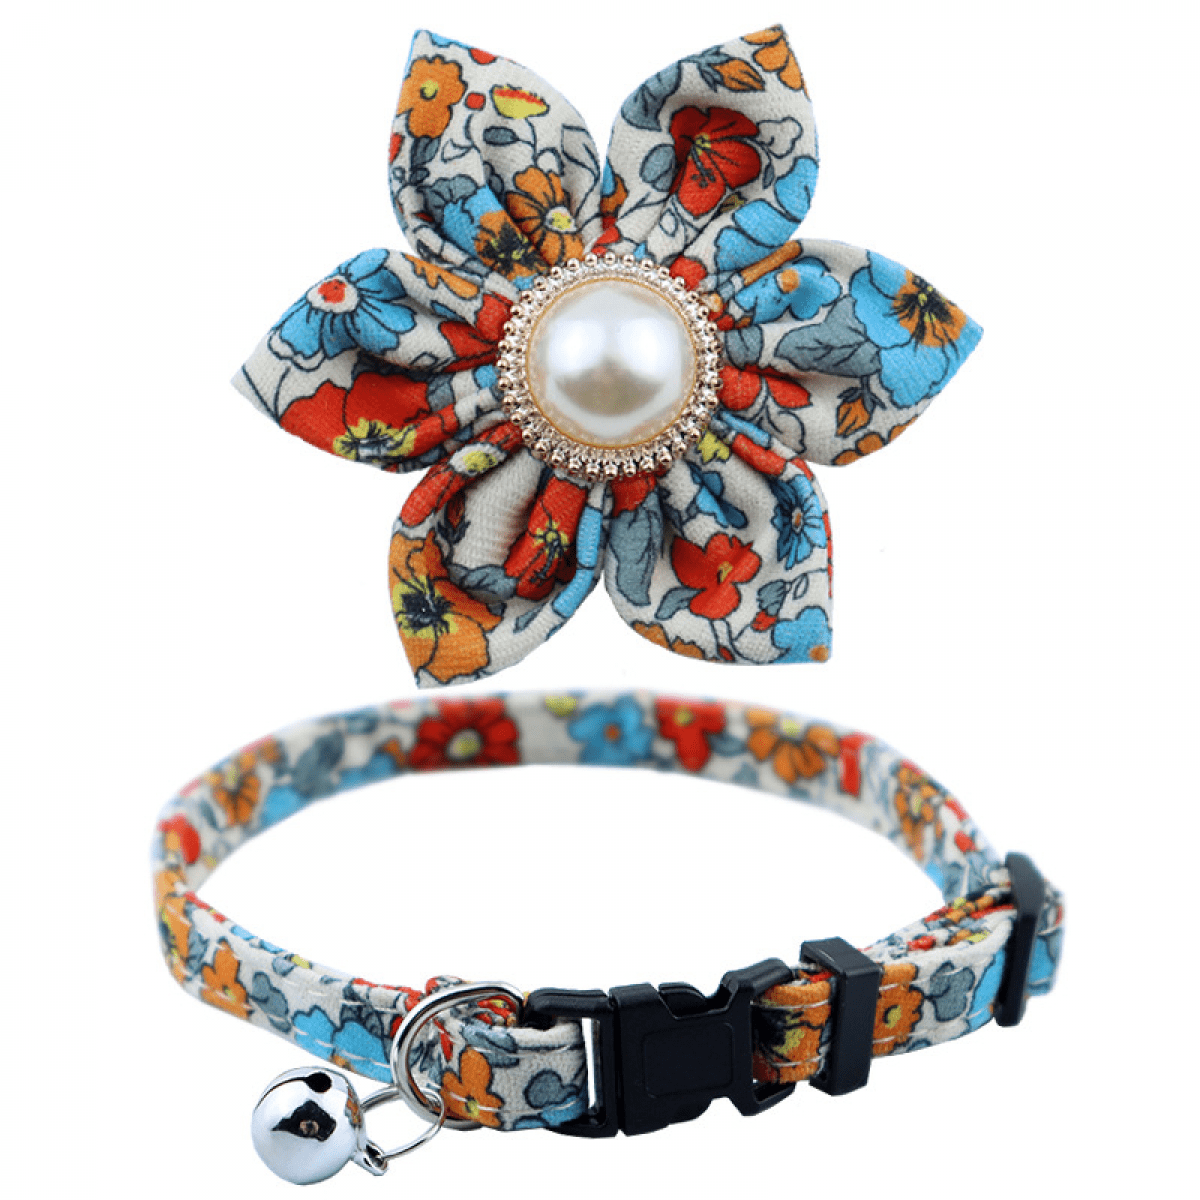 Dog Collar, Dog Collar with Flower, Girl Dog Collar Soft Floral Pet Collar  Adjustable Cute Dog Cat Collar with Safety Buckle for Small Medium Dogs.BF1G6  